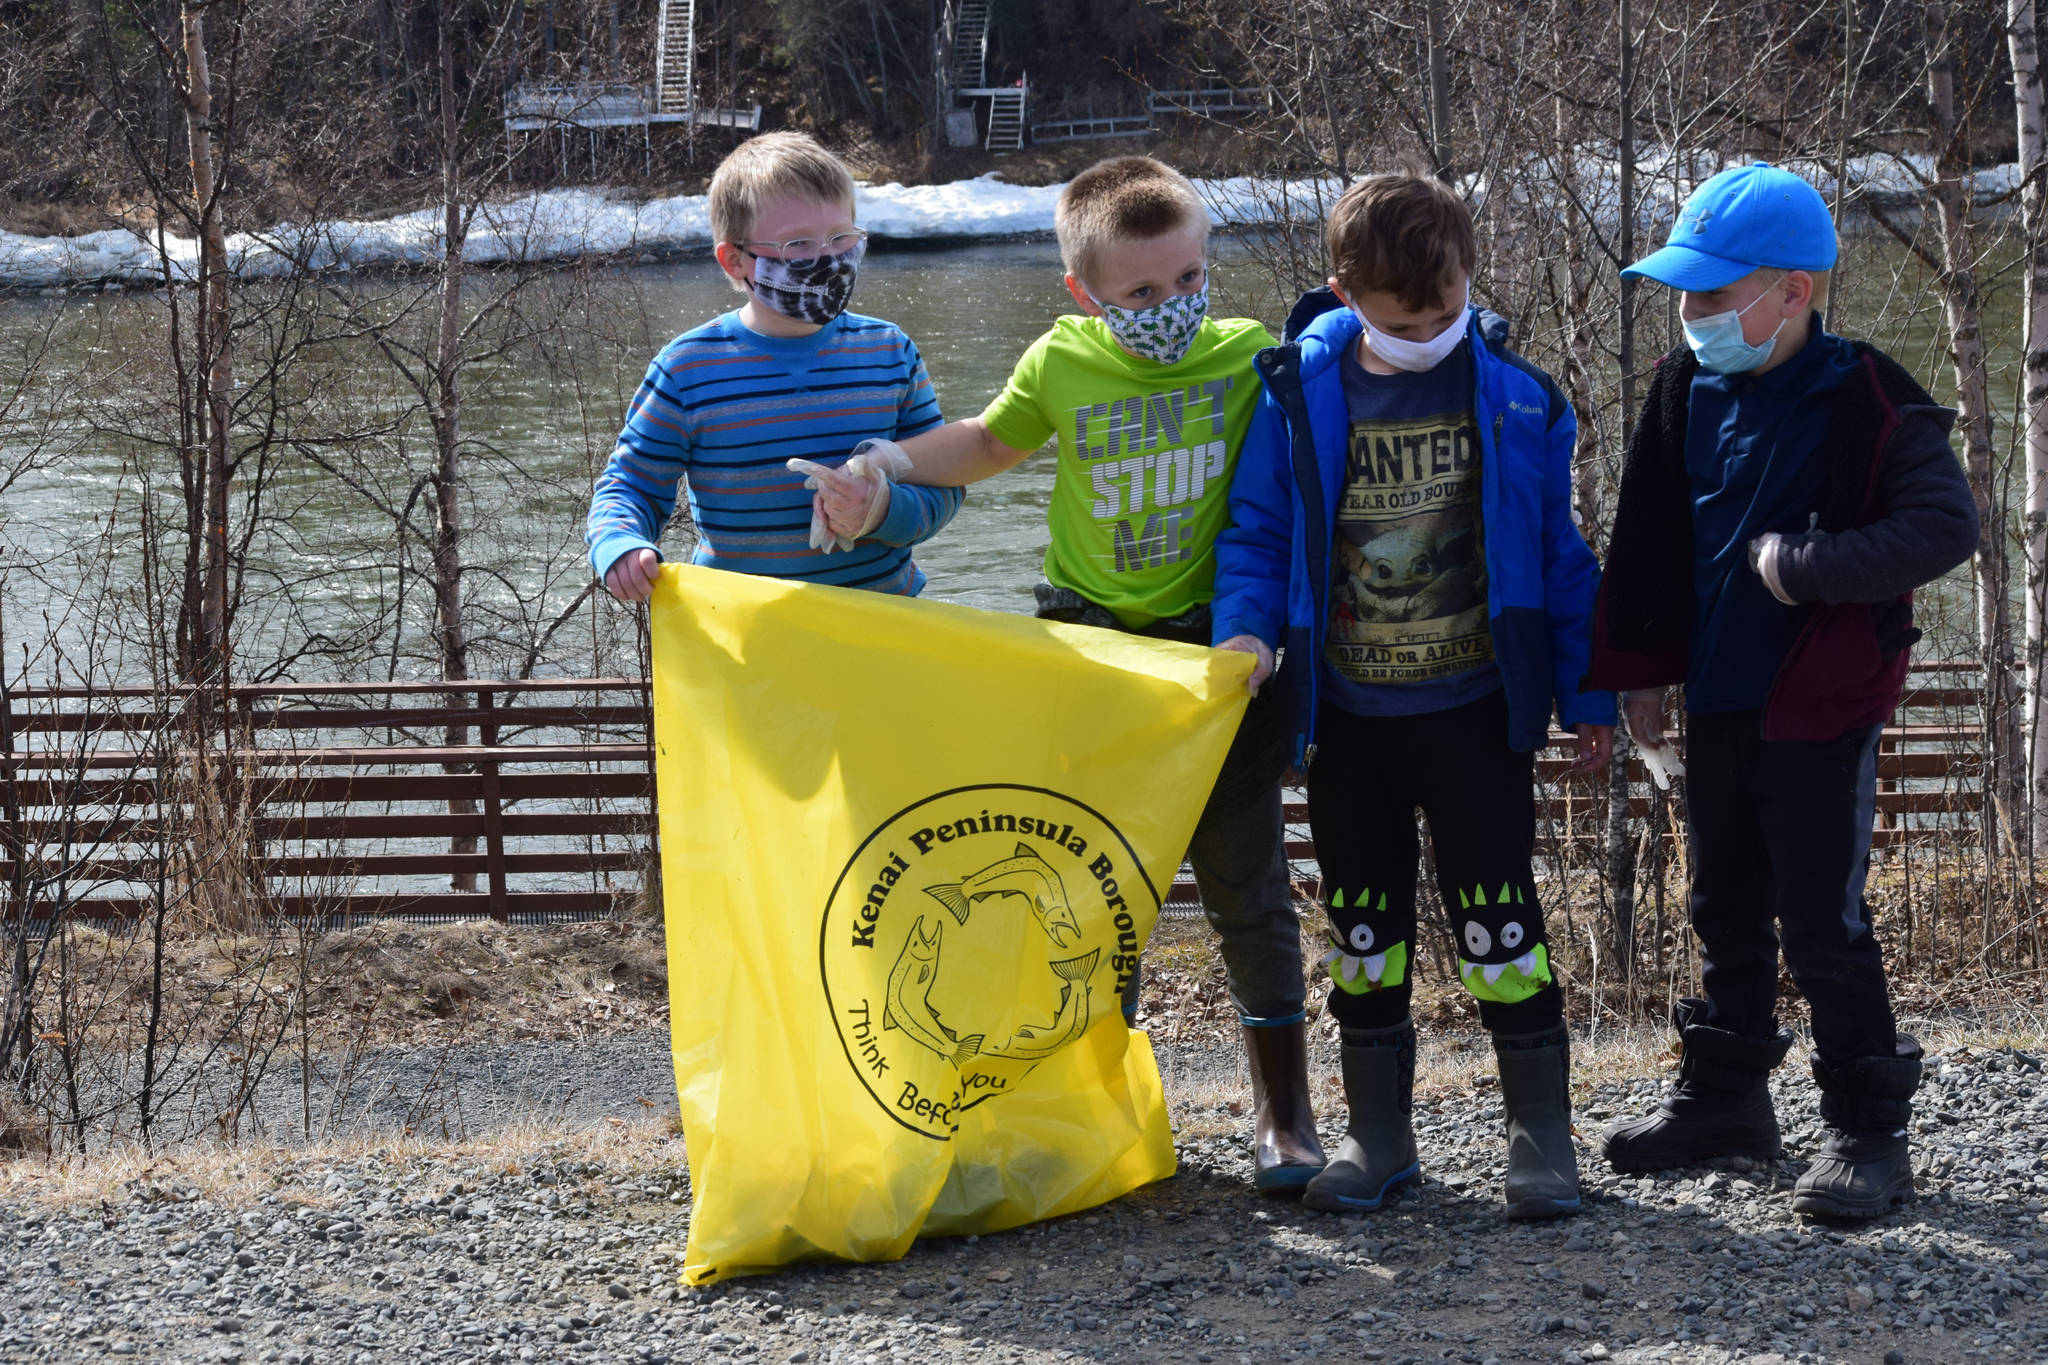 From left to right: Soldotna Montessori elementary schoolers Augie Mohr, Nathan Nelson, Kian Jester and Corbin Sulley participate in the annual Kenai River Spring Cleanup at Soldotna Creek Park in Soldotna, Alaska, on Friday, May 7, 2021. (Camille Botello / Peninsula Clarion)
From left to right: Soldotna Montessori elementary schoolers Augie Mohr, Nathan Nelson, Kian Jester and Corbin Sulley participate in the annual Kenai River Spring Cleanup at Soldotna Creek Park in Soldotna, Alaska, on Friday, May 7, 2021. (Camille Botello / Peninsula Clarion)